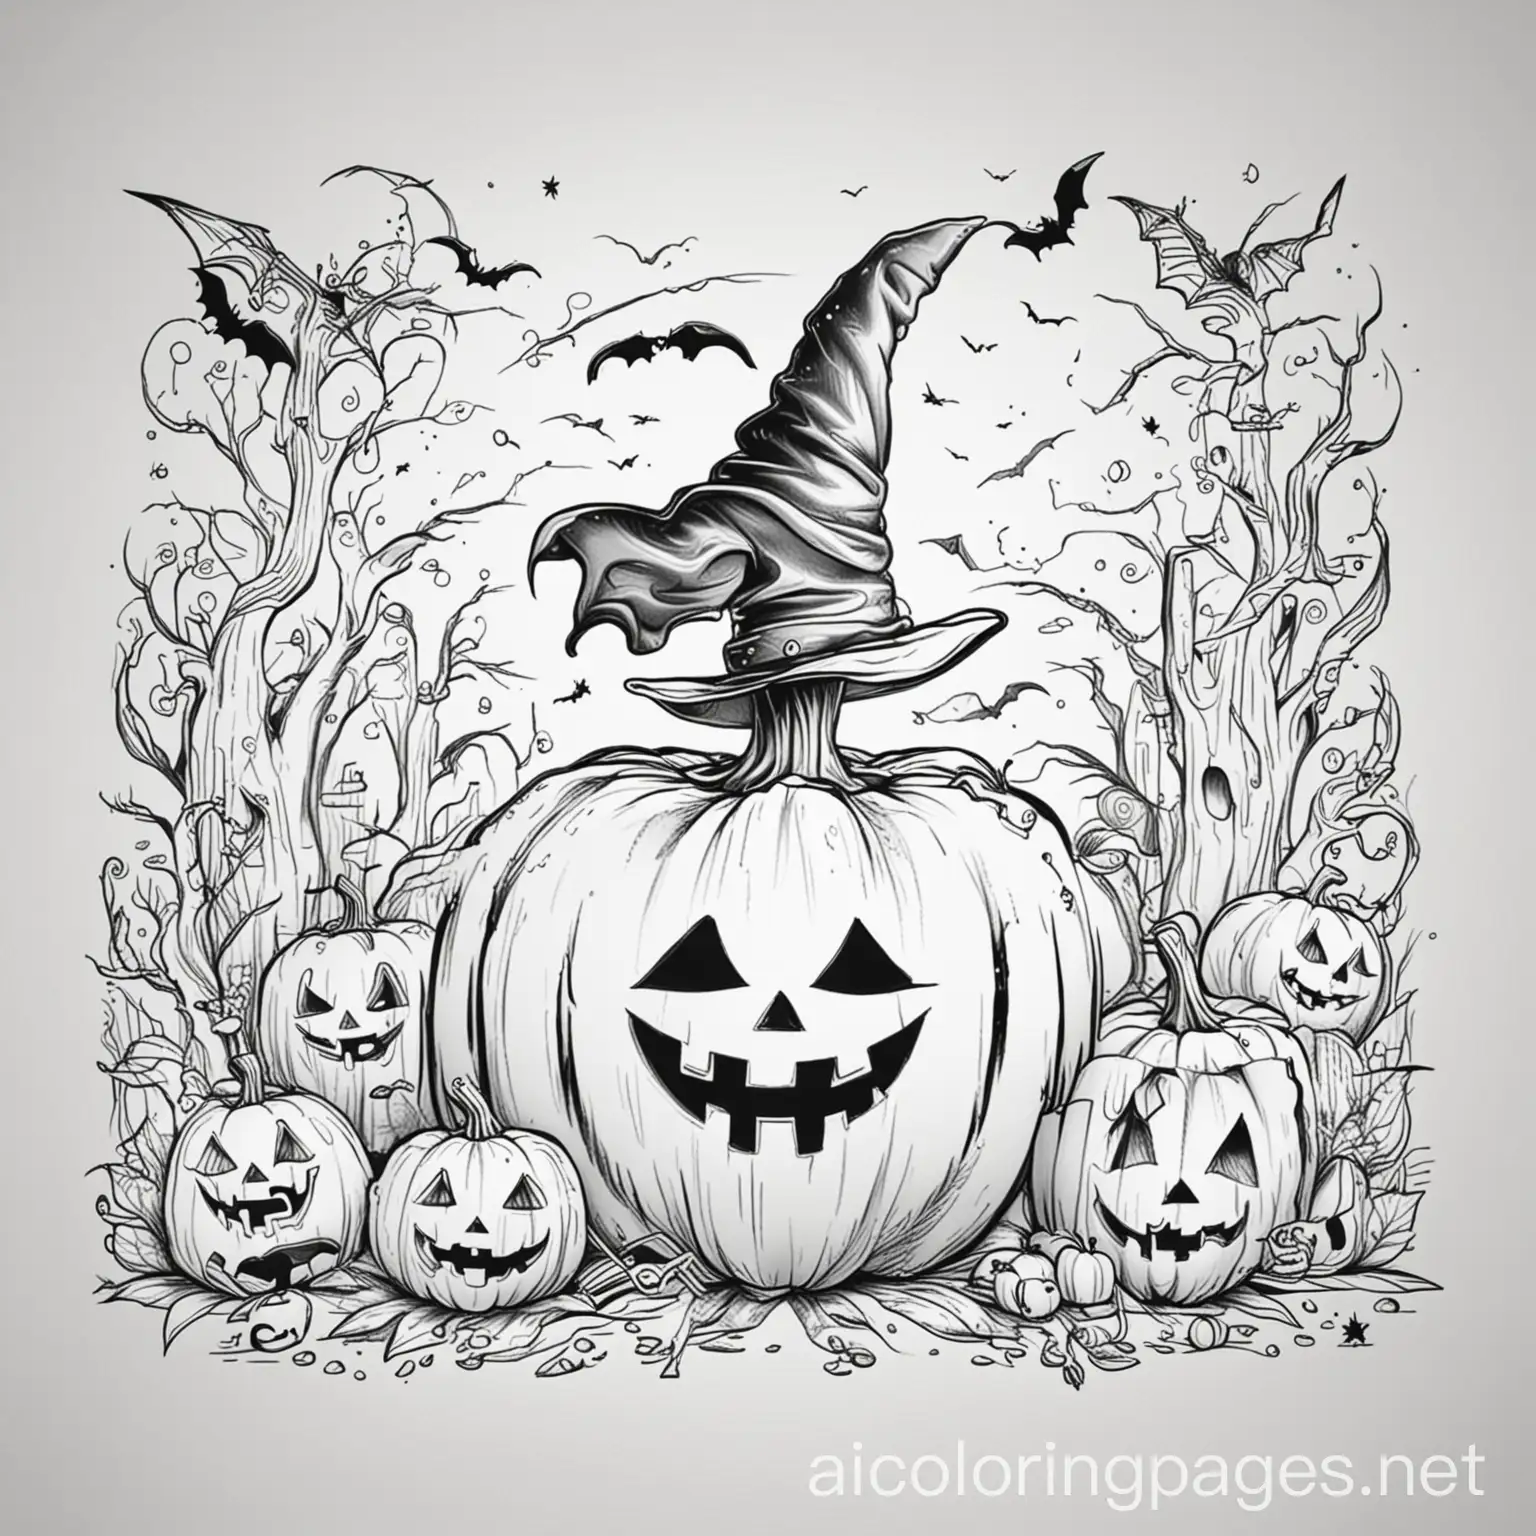 happy halloween black and white coloring pages, Coloring Page, black and white, line art, white background, Simplicity, Ample White Space. The background of the coloring page is plain white to make it easy for young children to color within the lines. The outlines of all the subjects are easy to distinguish, making it simple for kids to color without too much difficulty